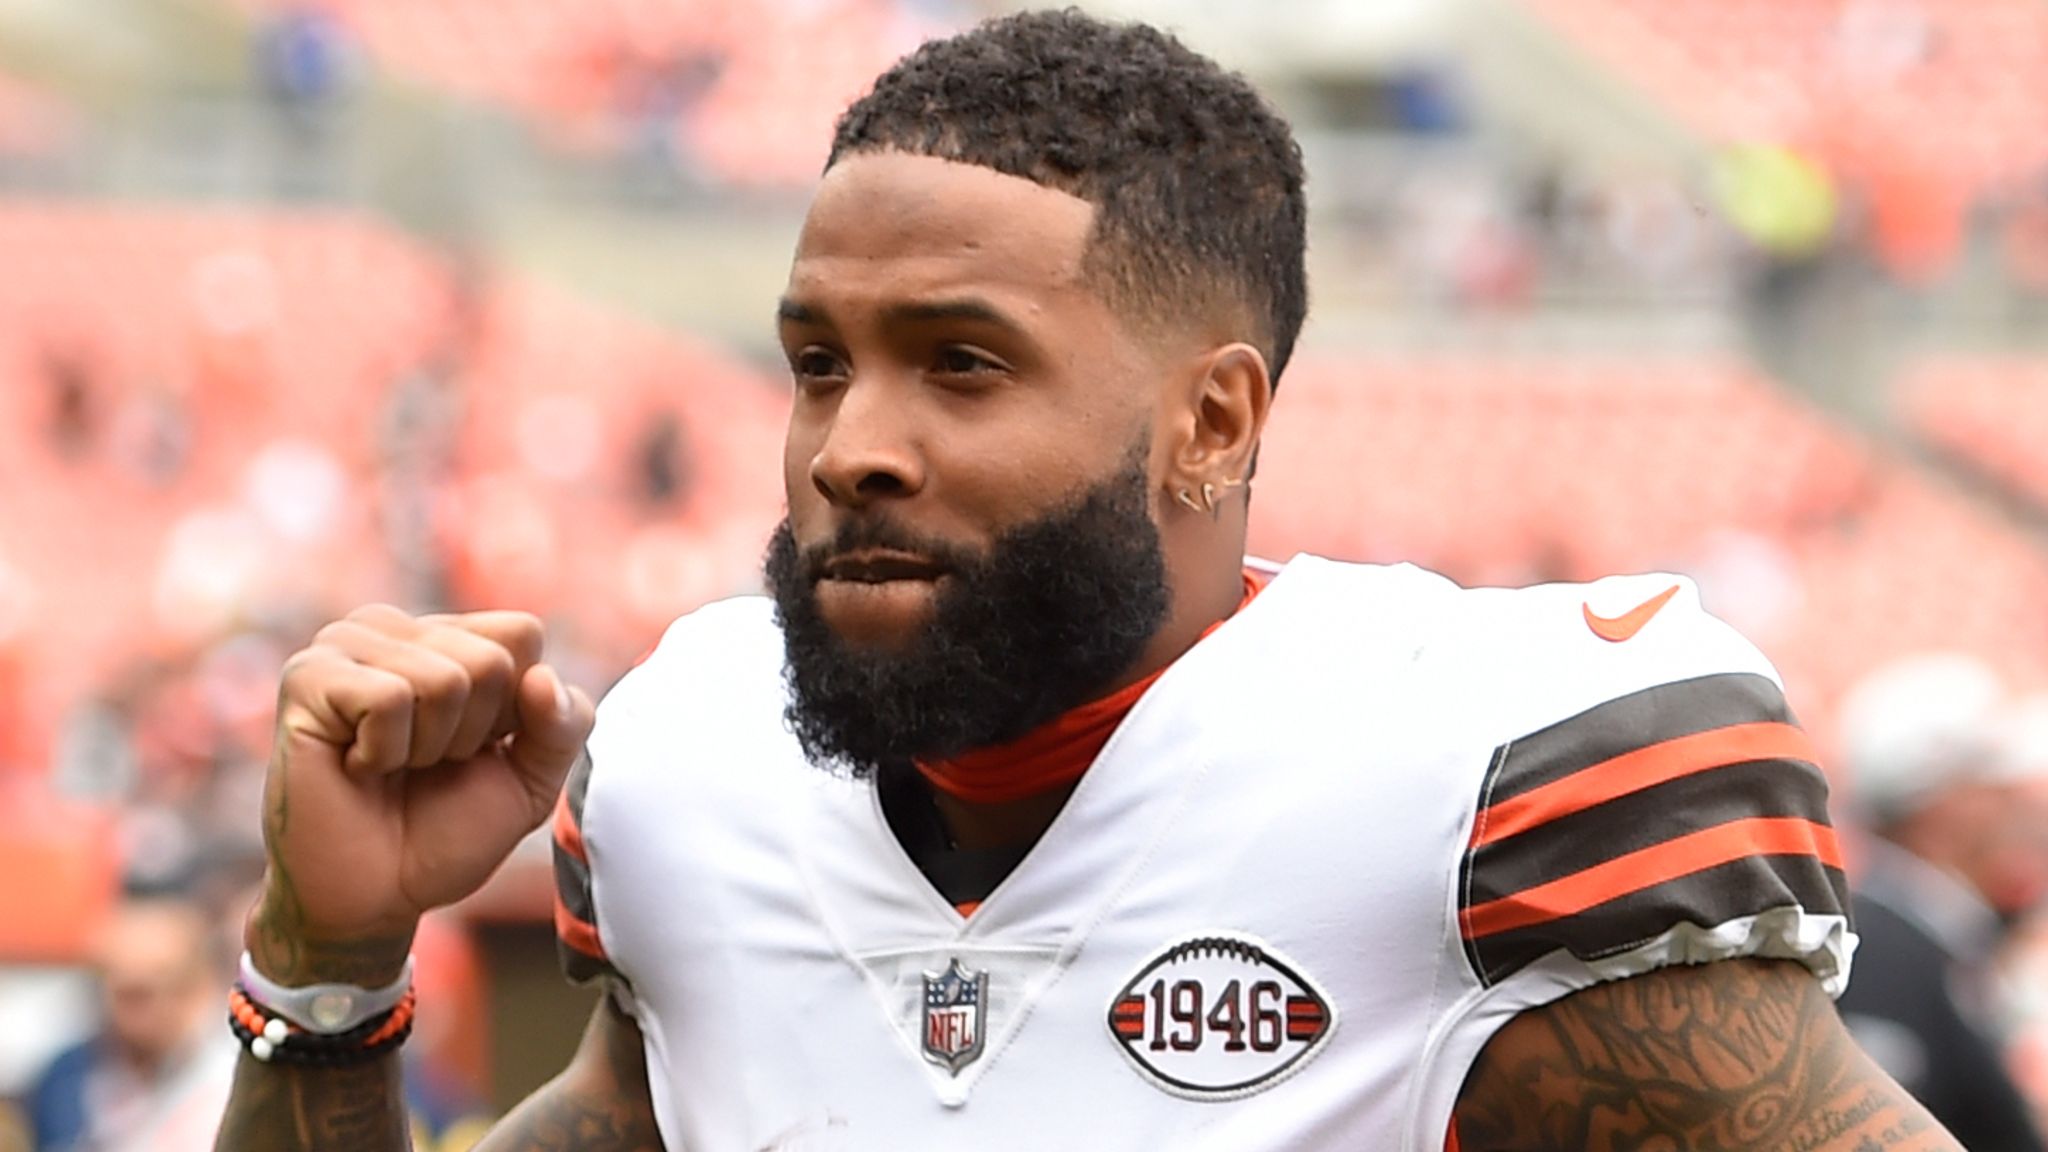  Odell Beckham Jr. Joins Miami Dolphins Excitement Builds as Former Teammates Set High Hopes-